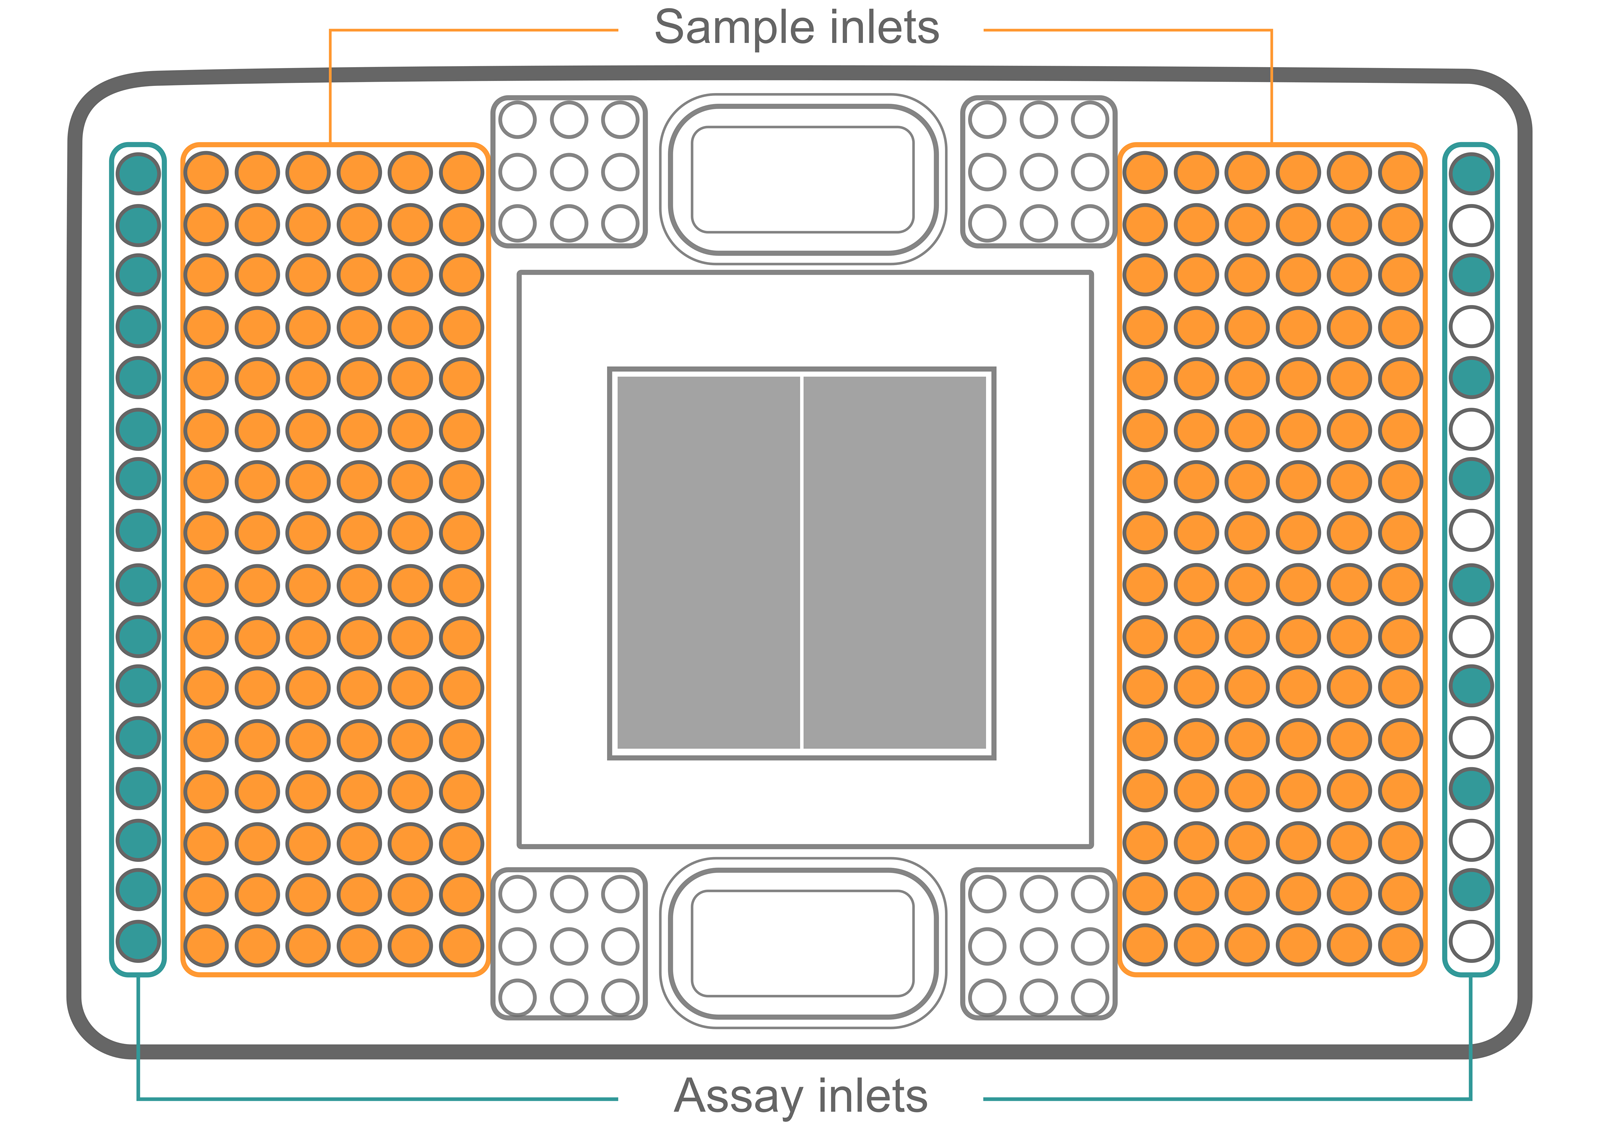 Graphical representation of Fluidigm 192.24 Dynamic Array IFC with the sample and assay inlets.